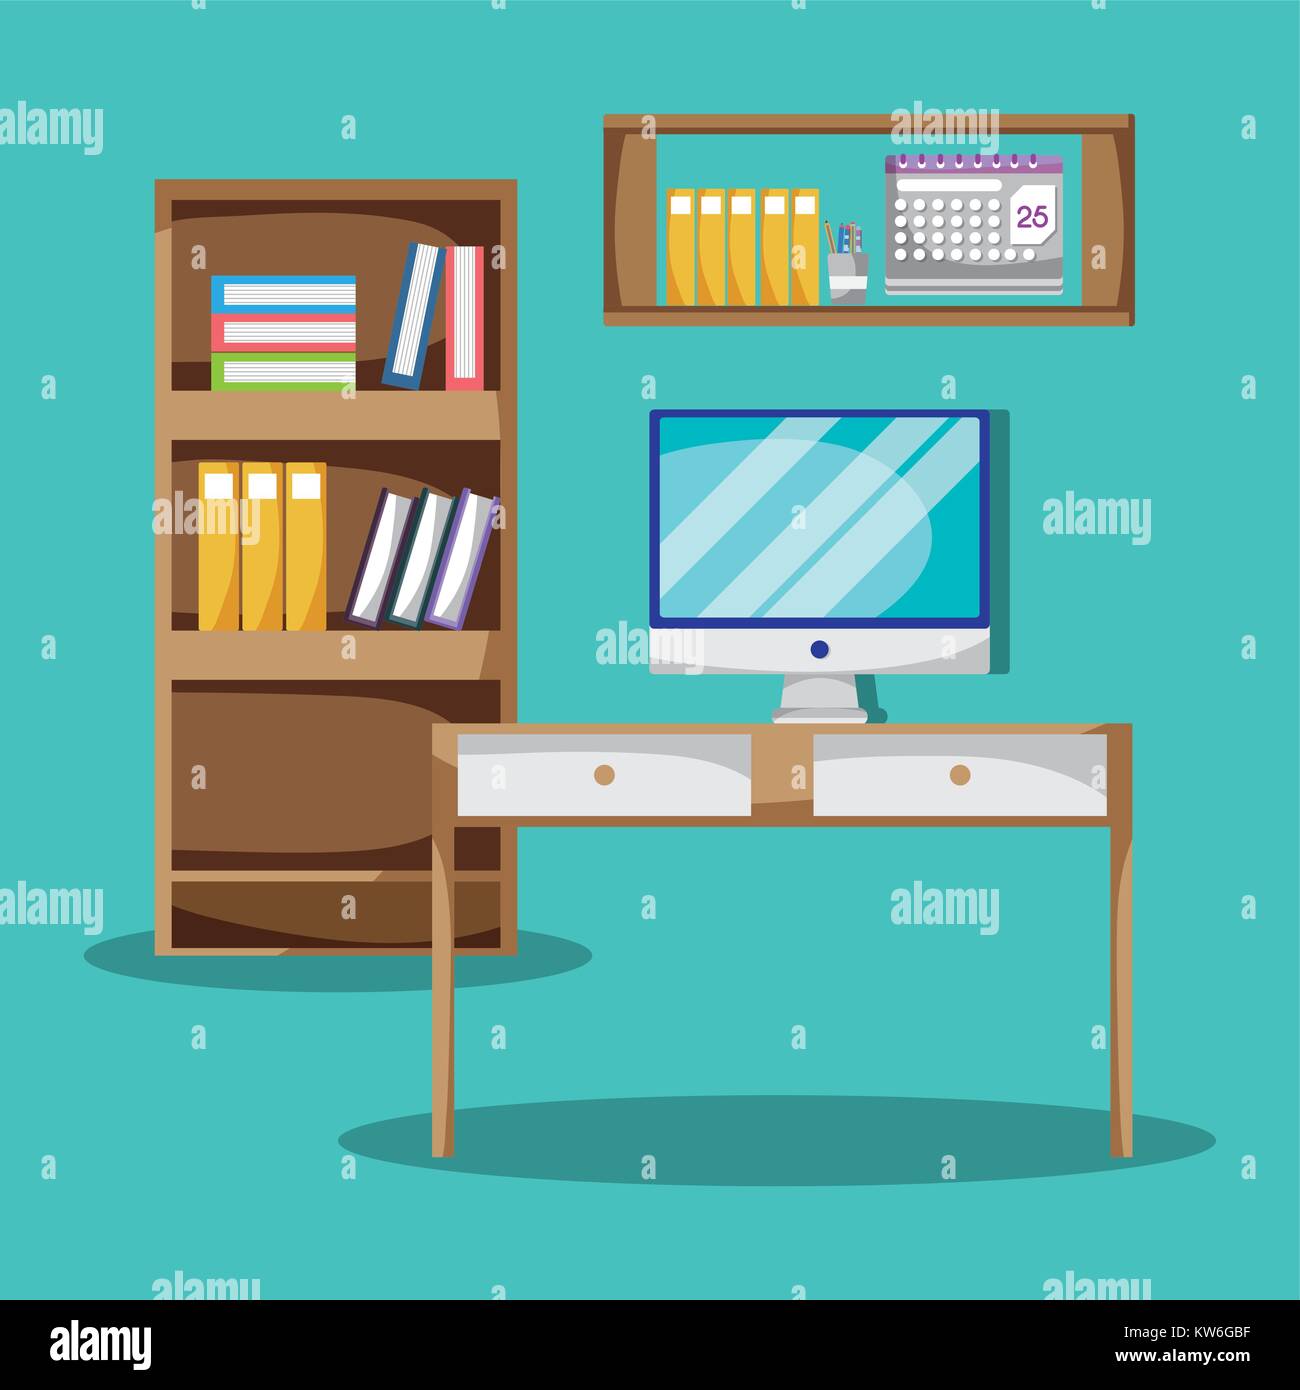 https://c8.alamy.com/comp/KW6GBF/desk-with-office-flat-accessories-to-work-vector-illustration-KW6GBF.jpg